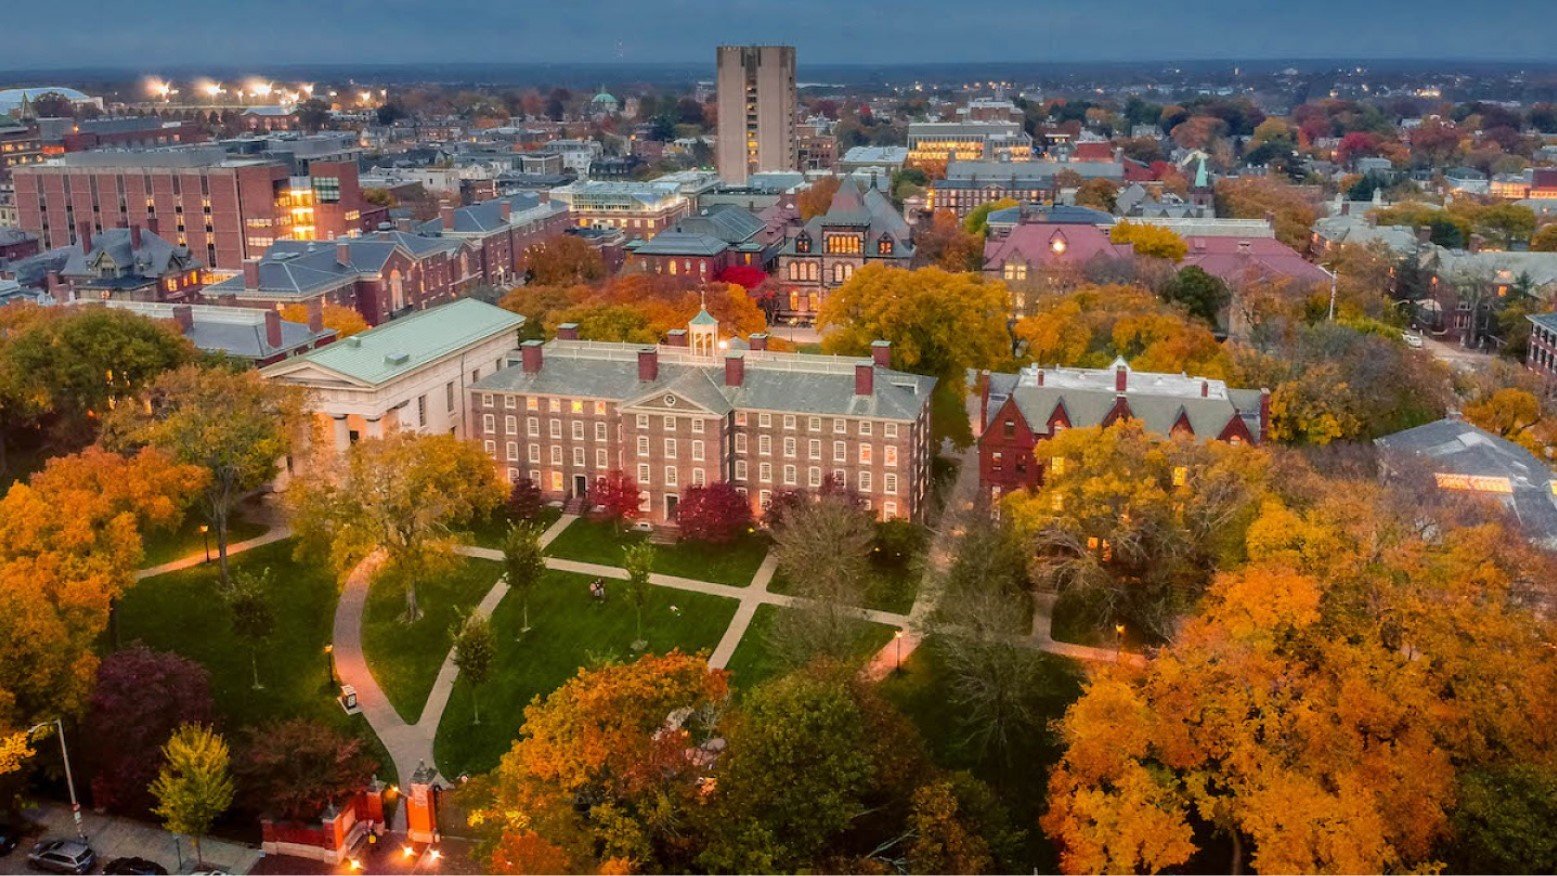 <p>Consequently, Harvard is still an influential institution, and many experts believe that other universities will follow its example and reinstate standardized testing this year.  </p> <p>However, several schools, including Brown Yale, Dartmouth, Georgetown, and M.I.T., actually reversed their standardized test policy before Harvard. So, some might say Harvard is the one following suit.  </p>